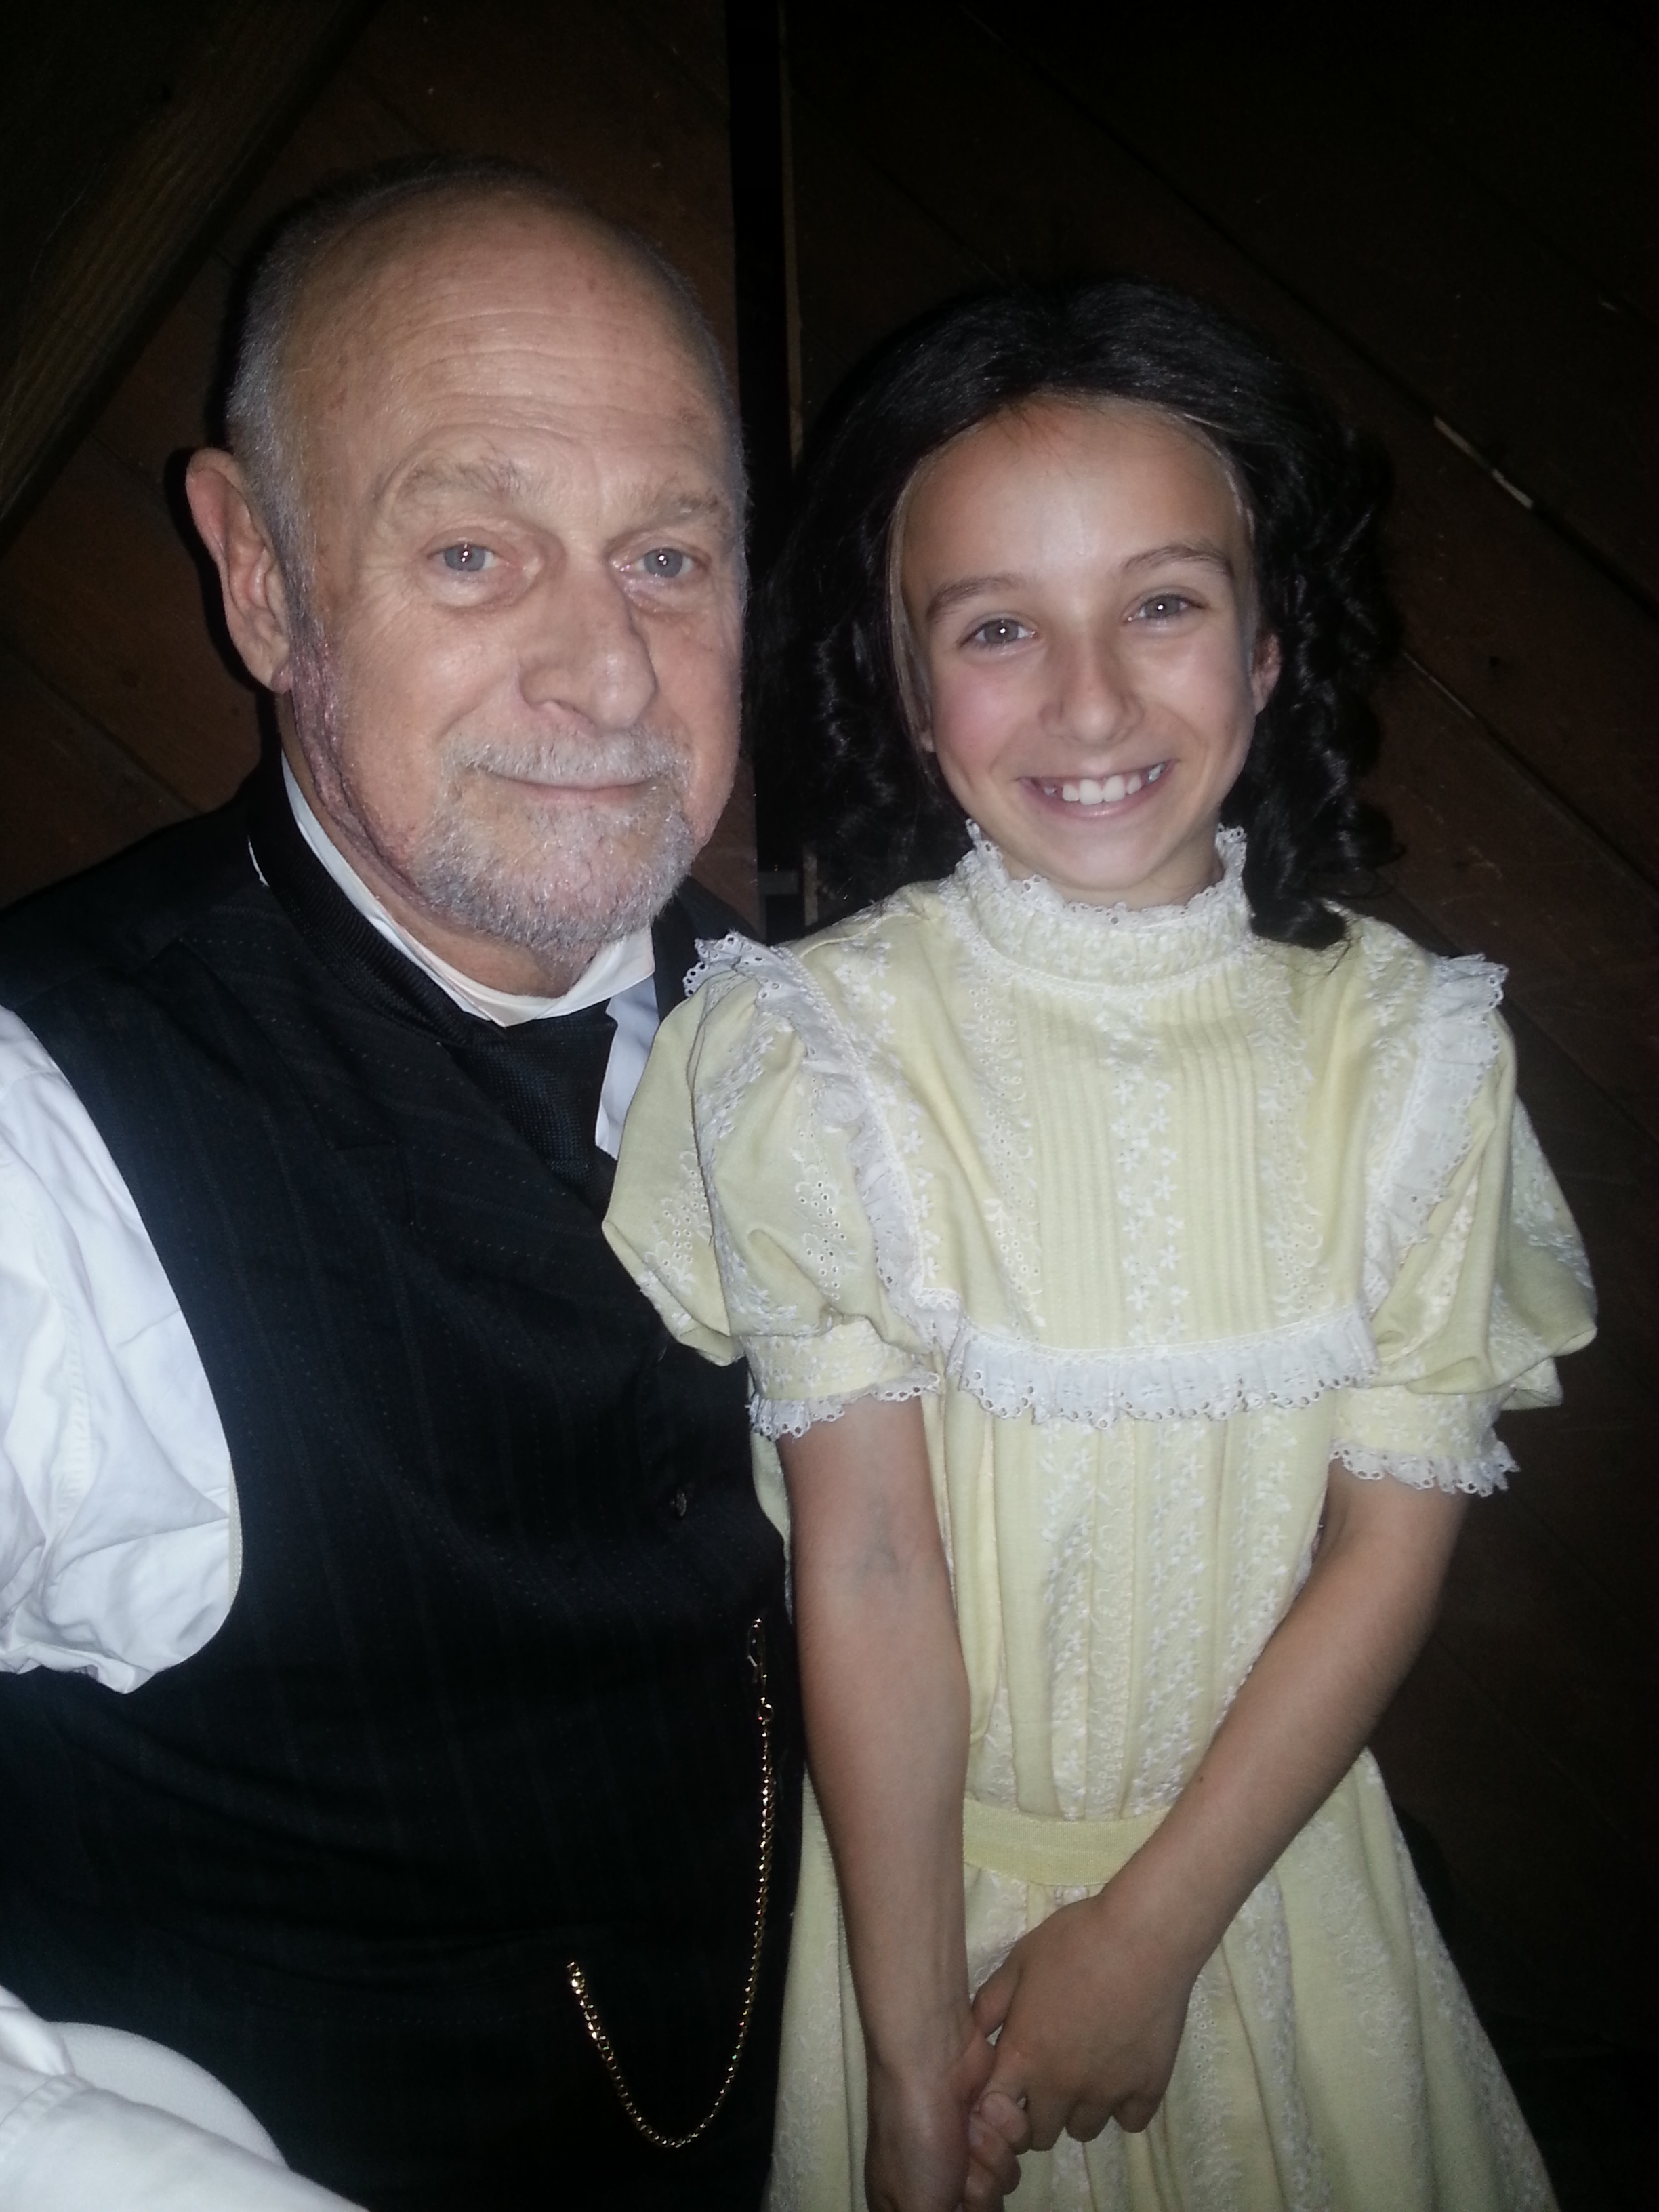 Paris on set of The Disappointments Room with Gerald McRaney.